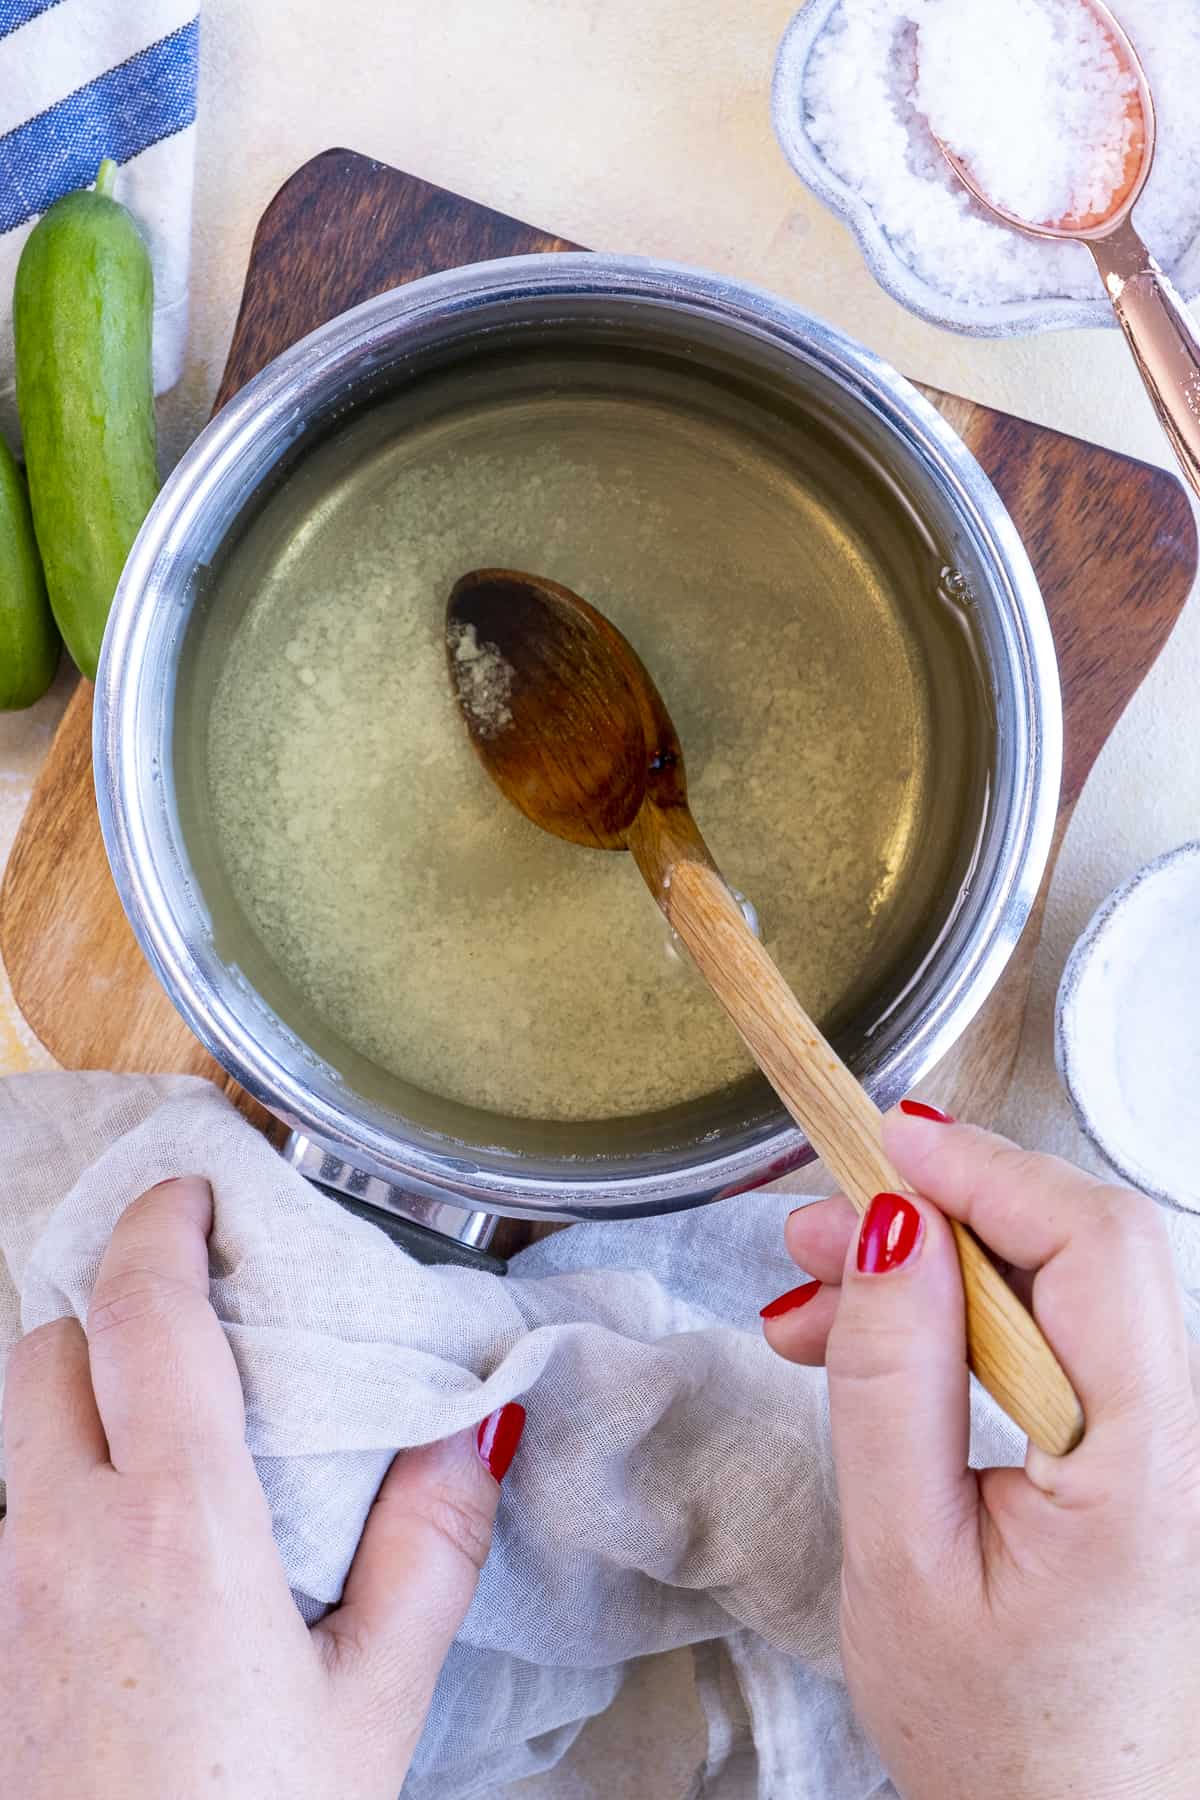 Hands mixing pickle brine with a wooden spoon in a saucepan.